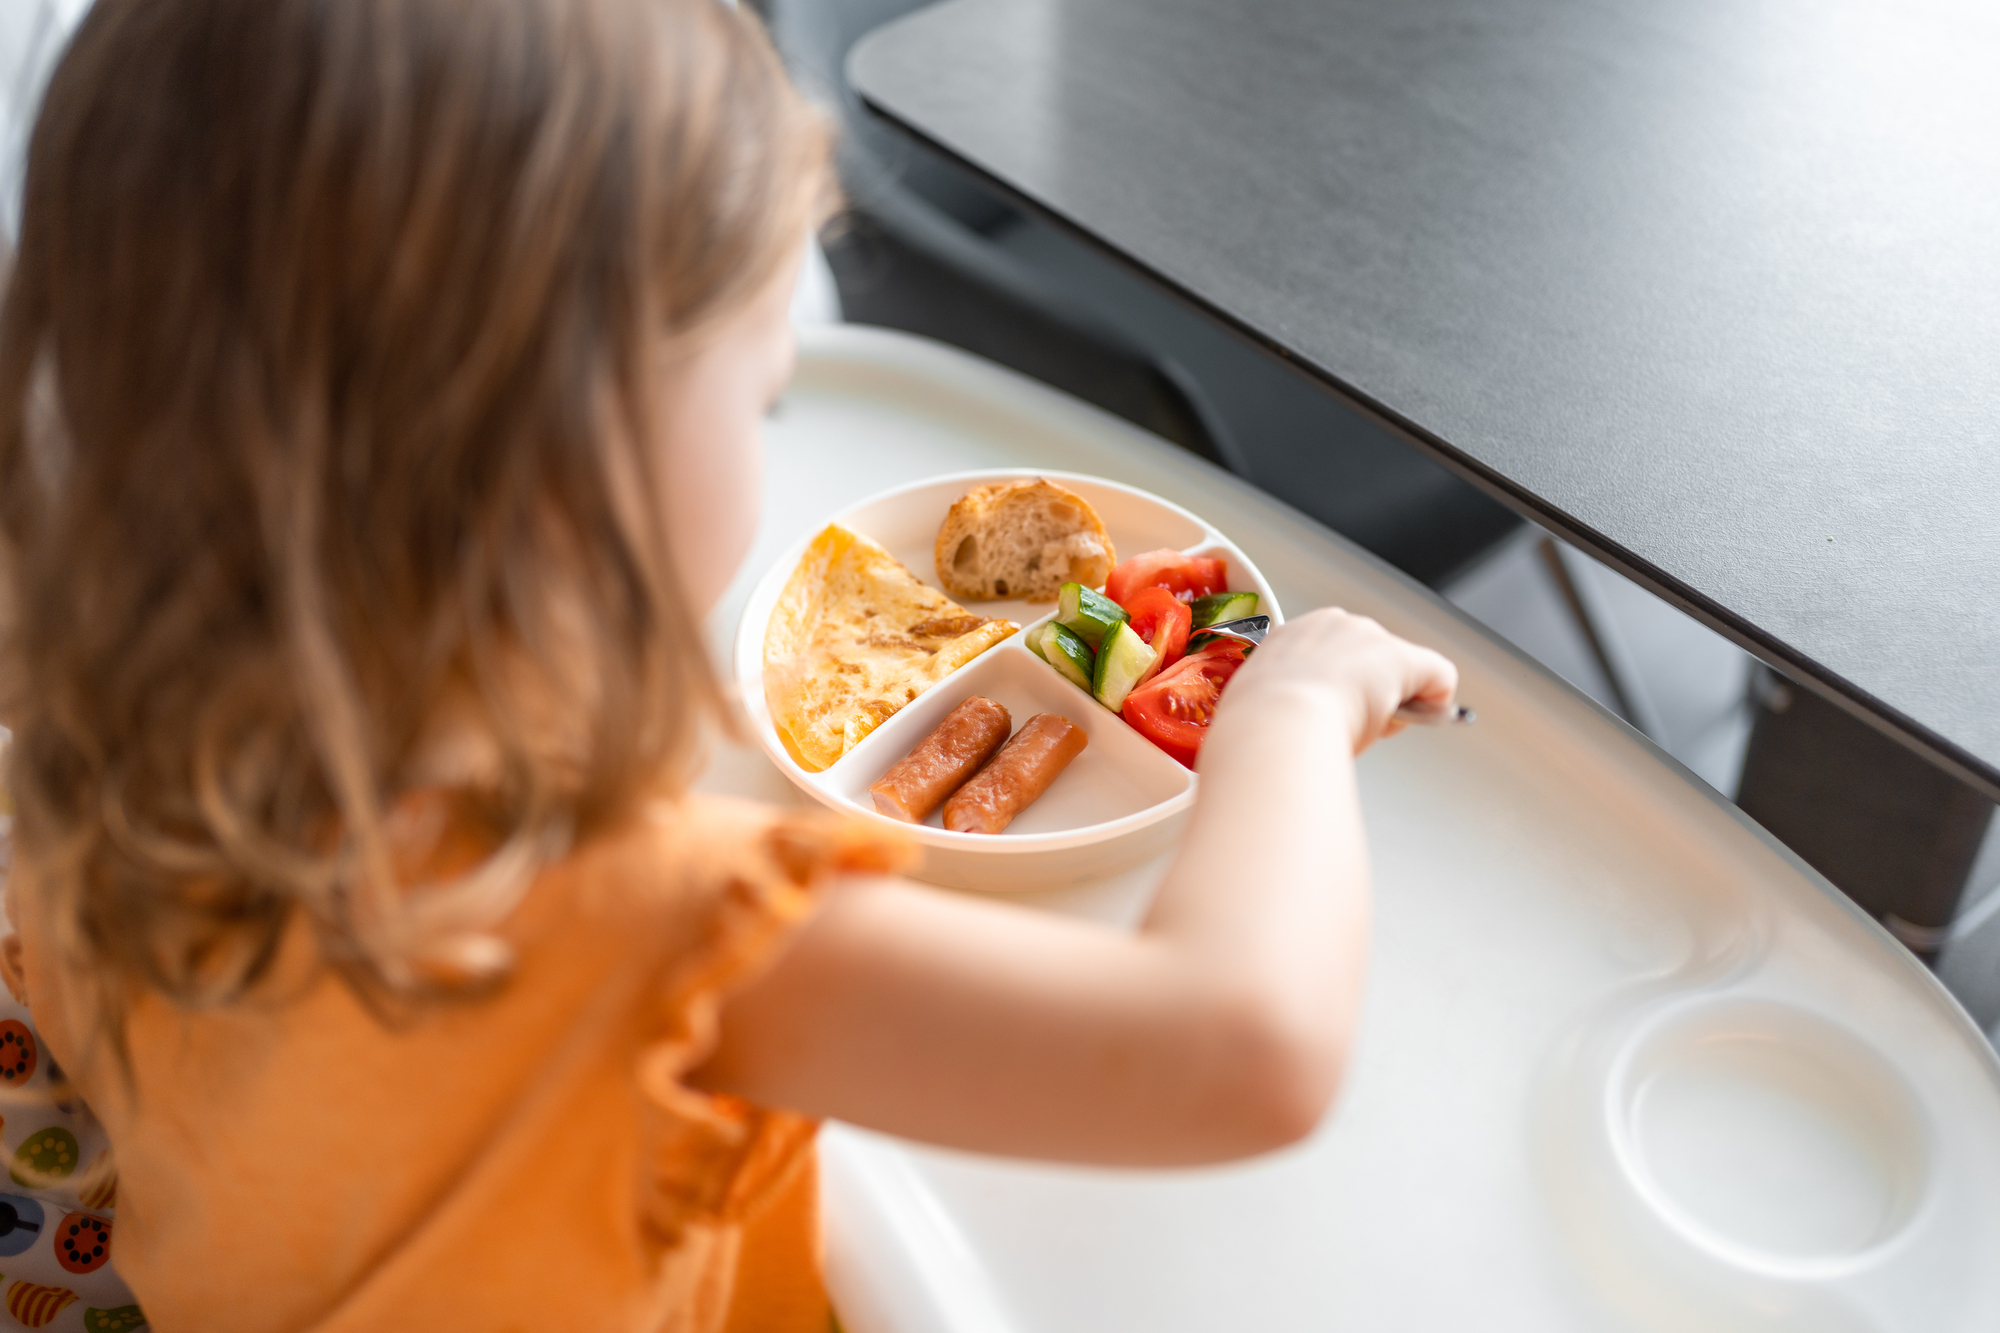 Nutrition 101: Developing Healthy Eating Habits in Kids